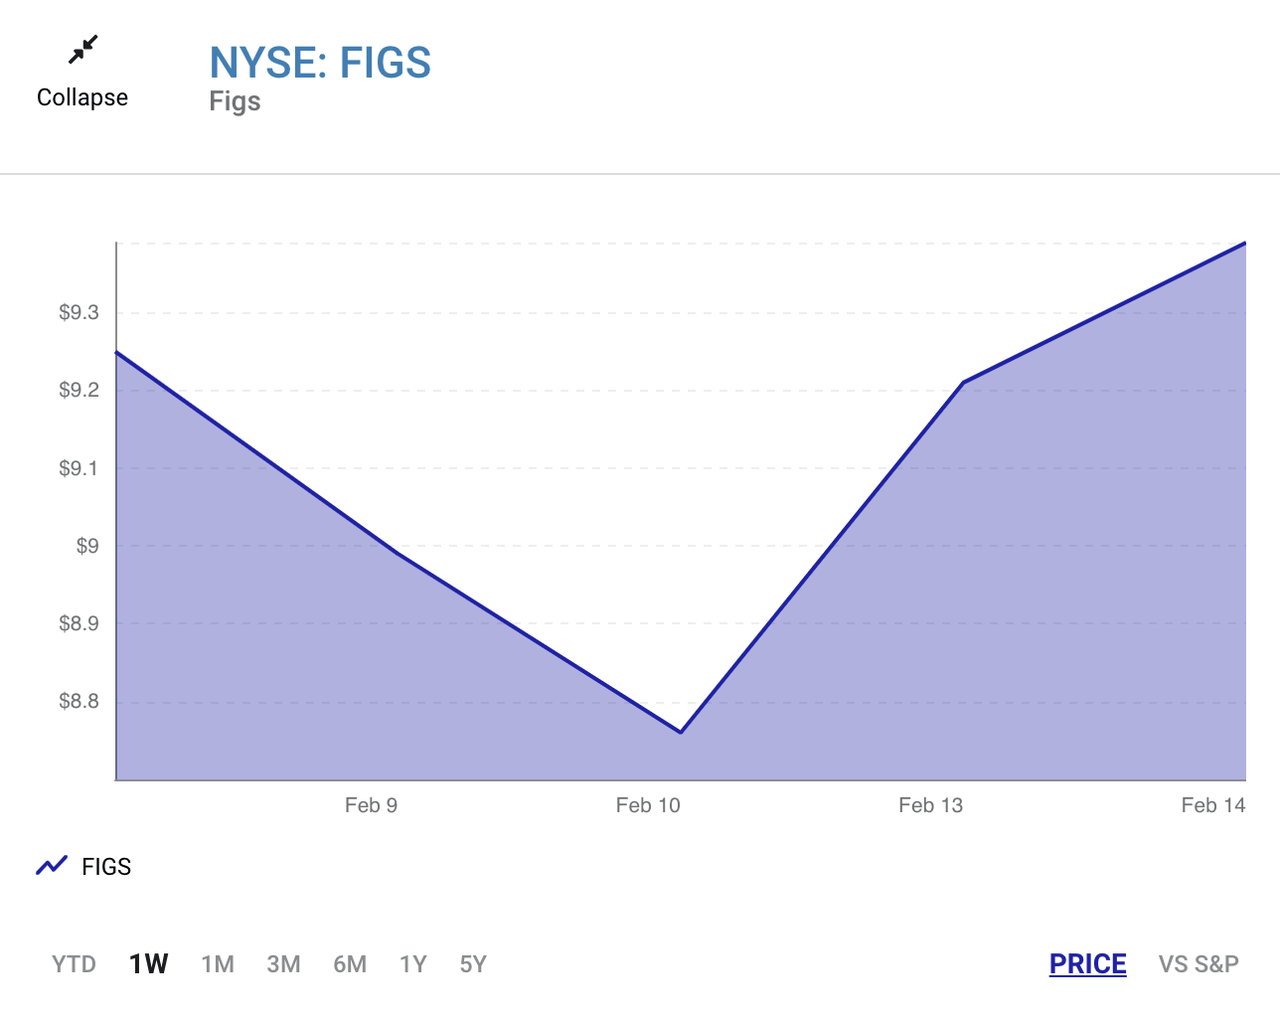 FIGS price suddenly increased after recent analyst report